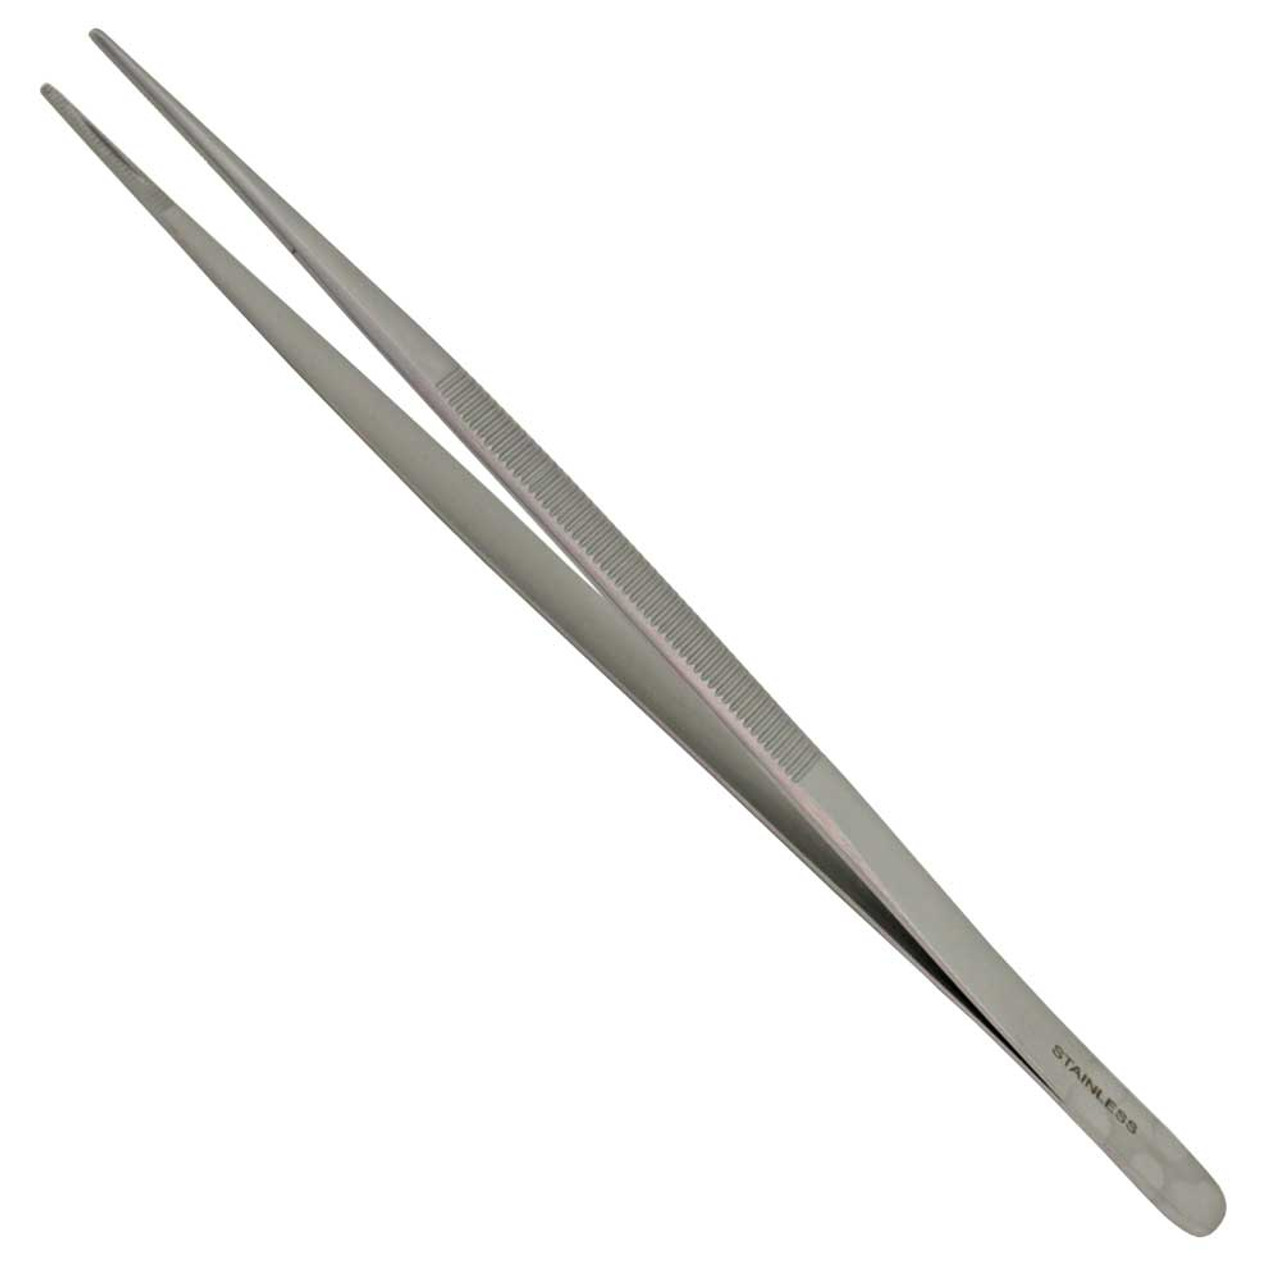 2X 5.5 Inch Long Silver Tone Stainless Steel Round Tip Tweezers